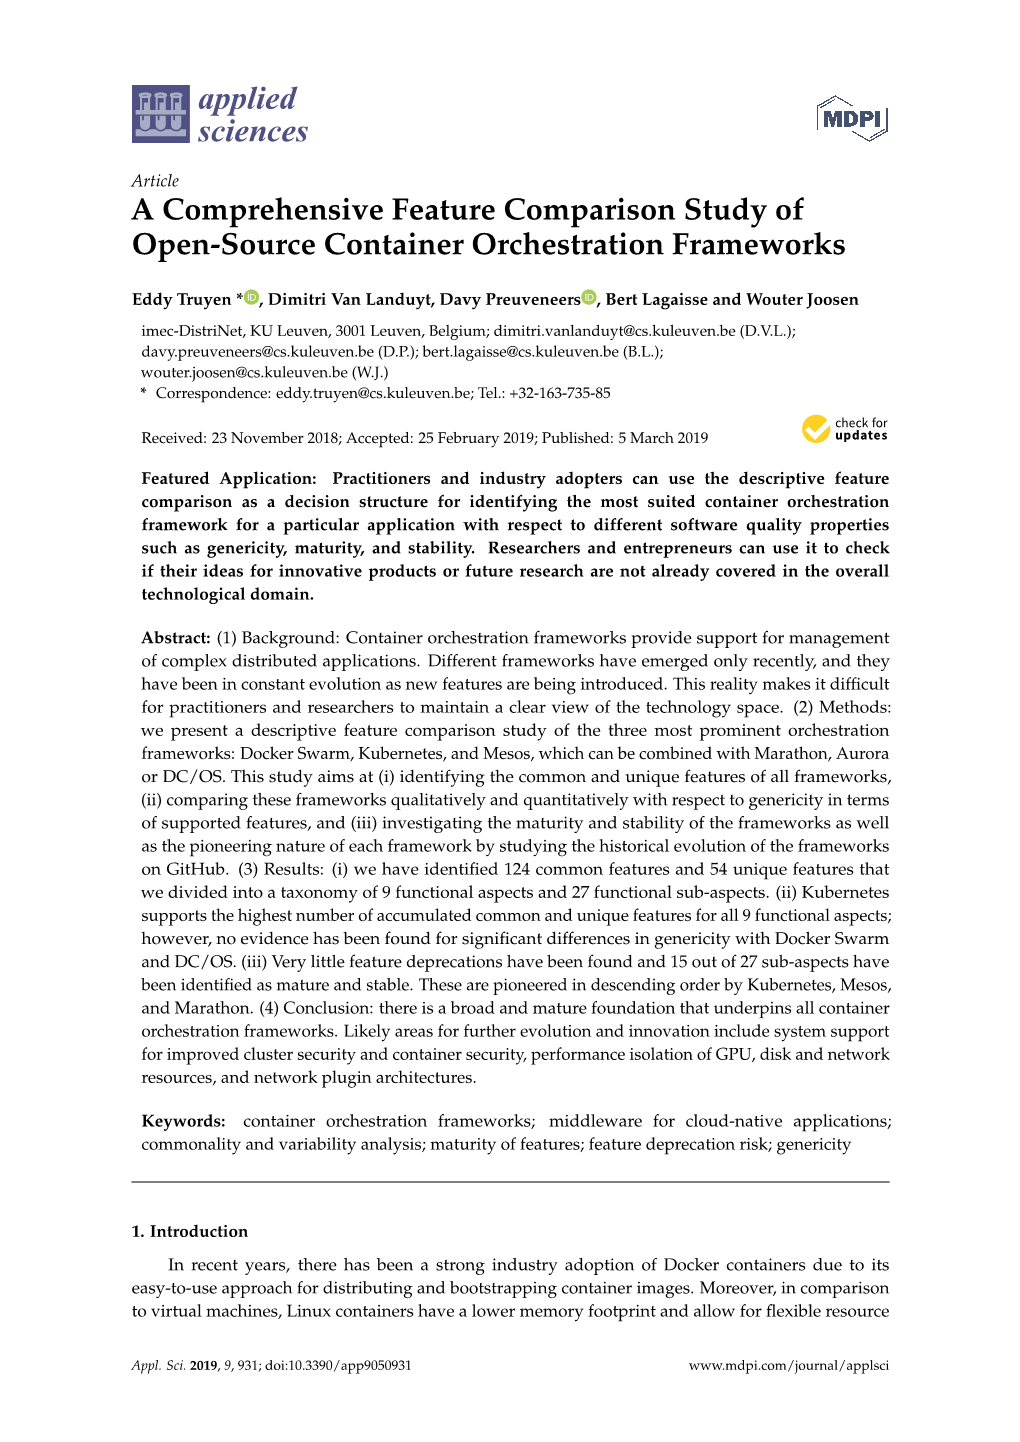 A Comprehensive Feature Comparison Study of Open-Source Container Orchestration Frameworks